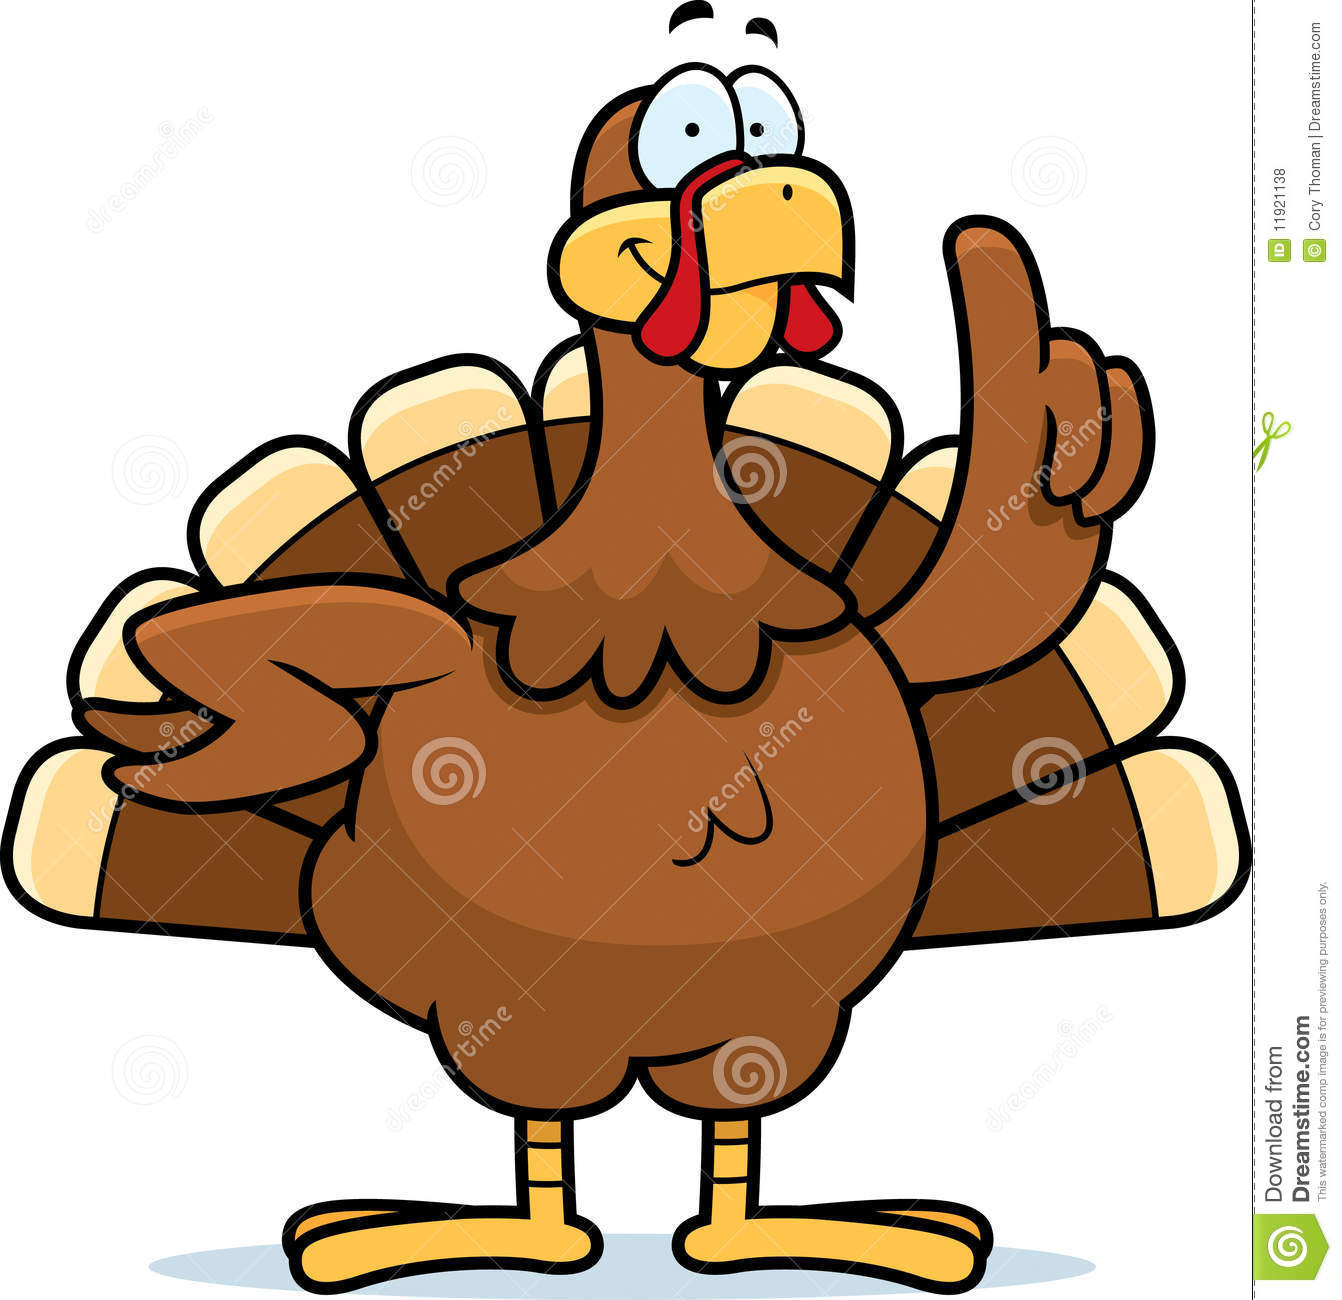 Thanksgiving Turkey Cartoon Images
 Turkey Face Clipart Clipart Suggest